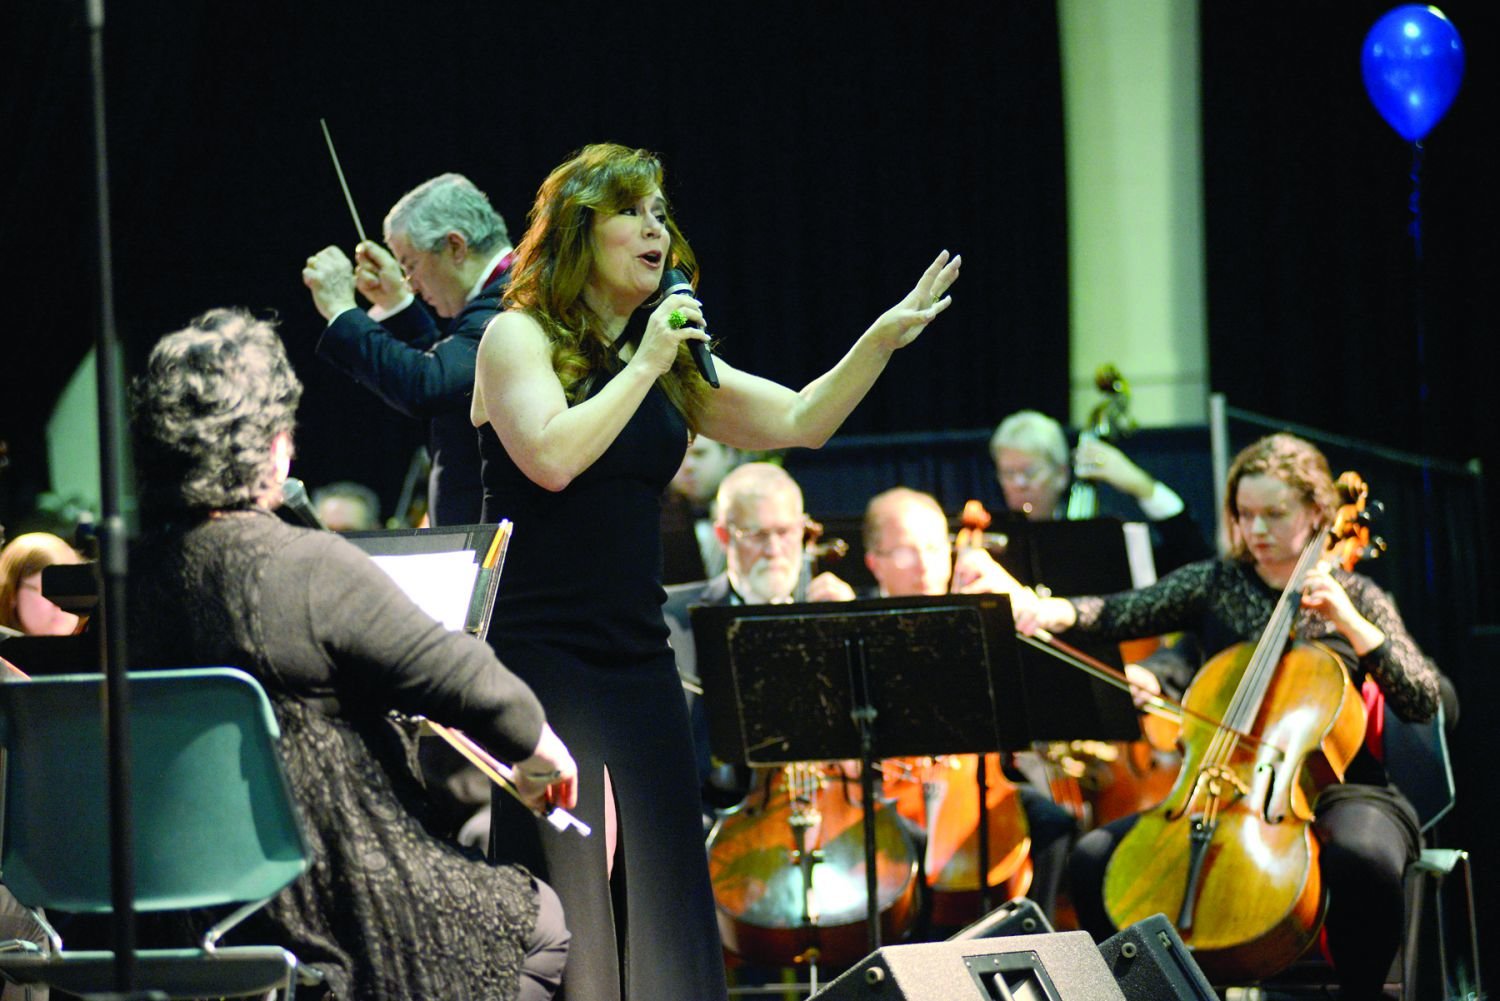 Debbie Gravitte sings as Music Director Gary S. Fagin, conducts the Bucks County Symphony Orchestra. Photograph by Carol Ross.